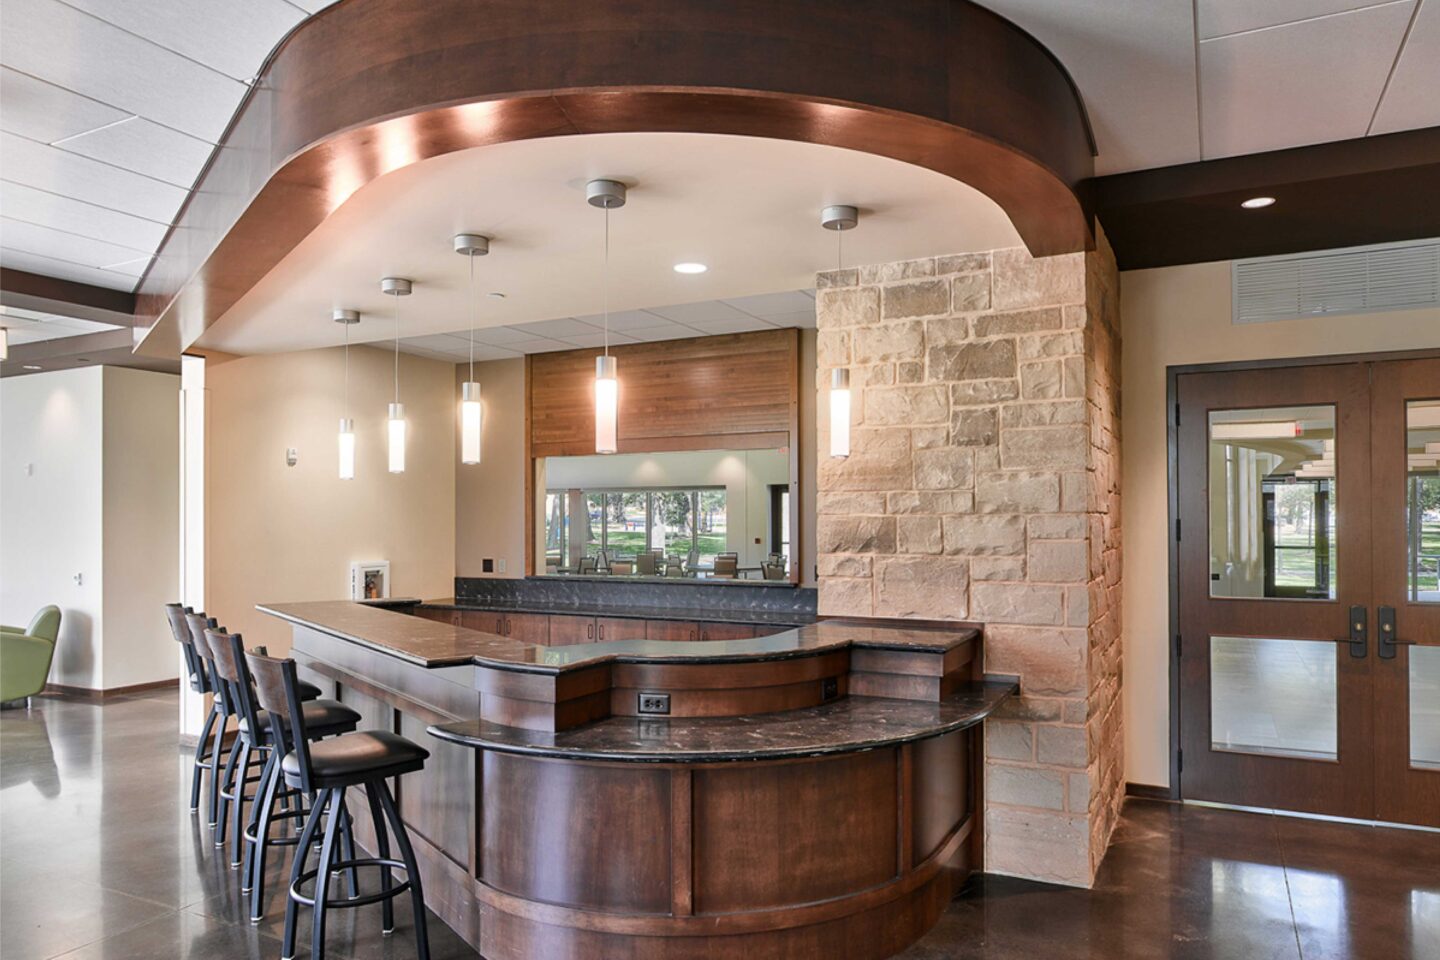 A bar area accented by wood and stone has contemporary and natural light